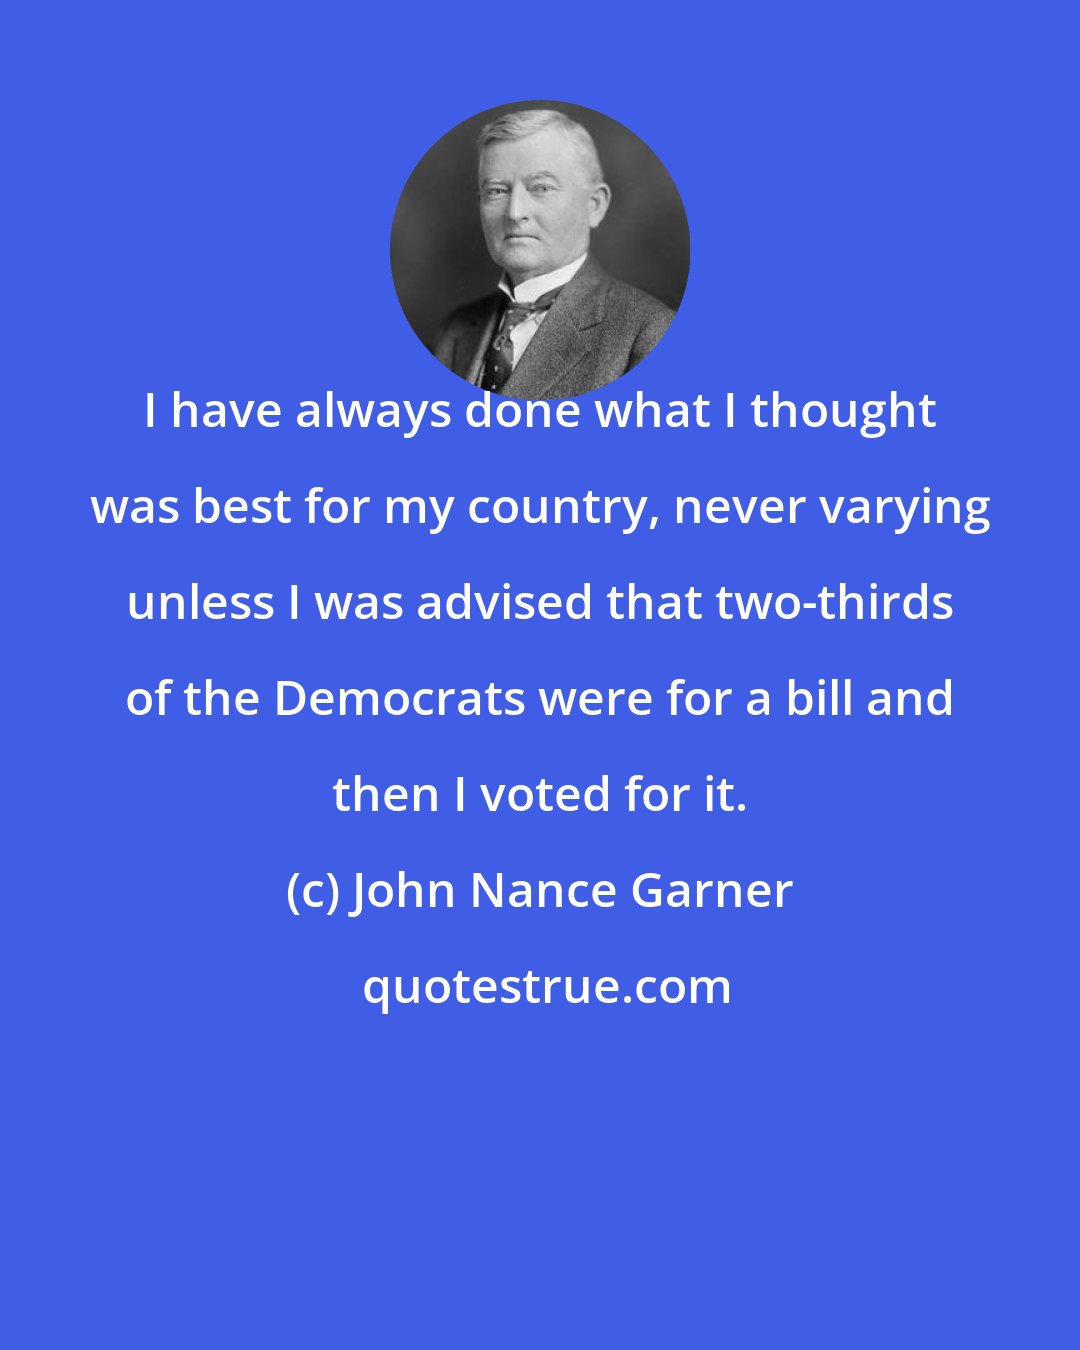 John Nance Garner: I have always done what I thought was best for my country, never varying unless I was advised that two-thirds of the Democrats were for a bill and then I voted for it.